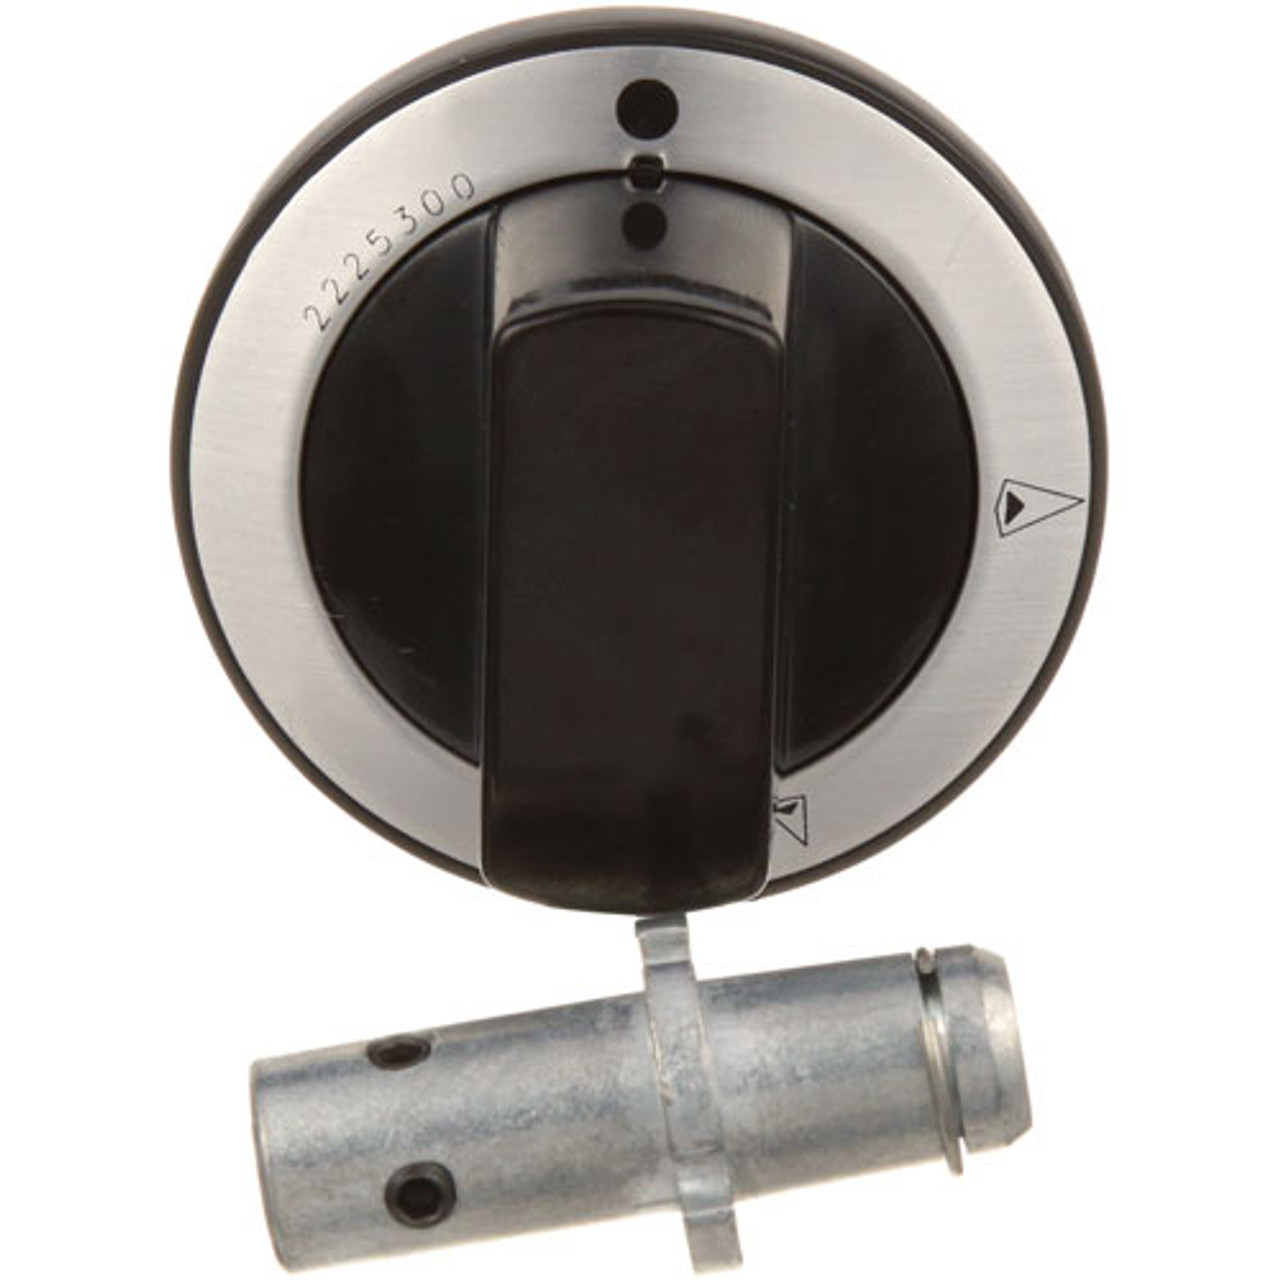 Knob Assy - Replacement Part For Garland 2522111